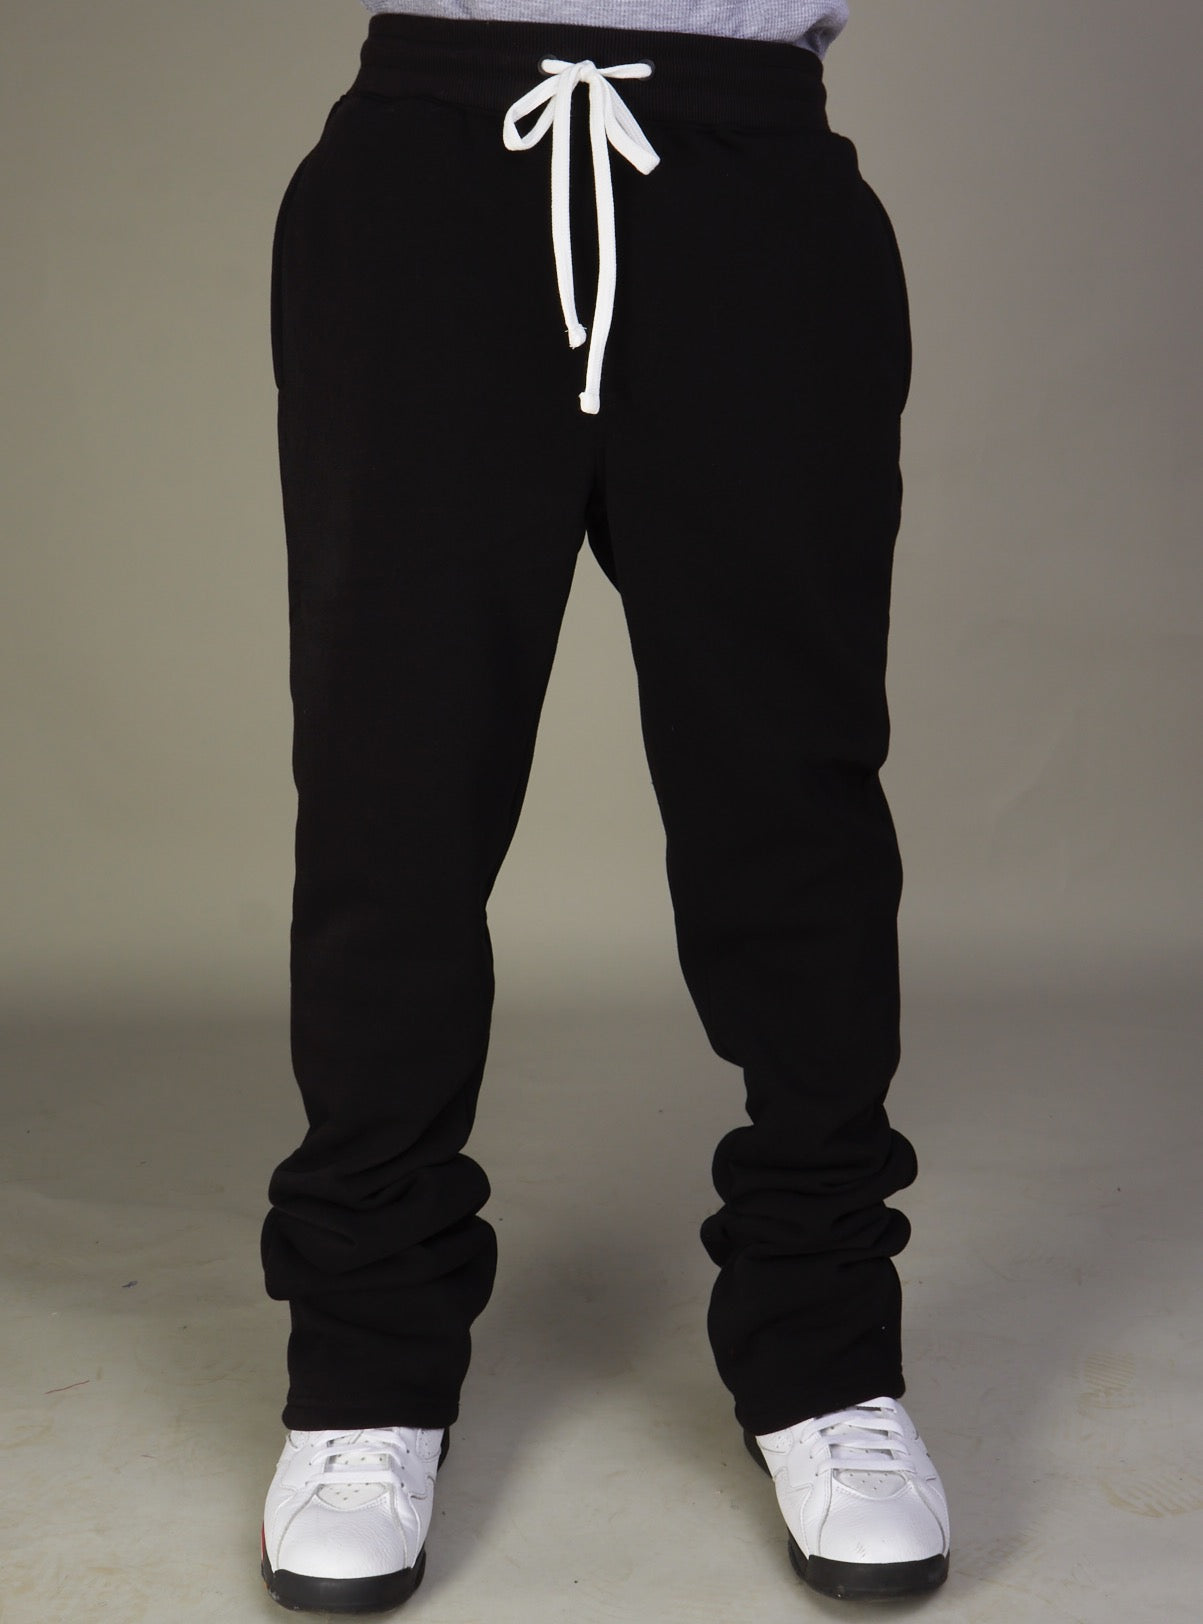 DSFEOIGY Mens Black Pants Clothing Joggers Stacked Sweatpants